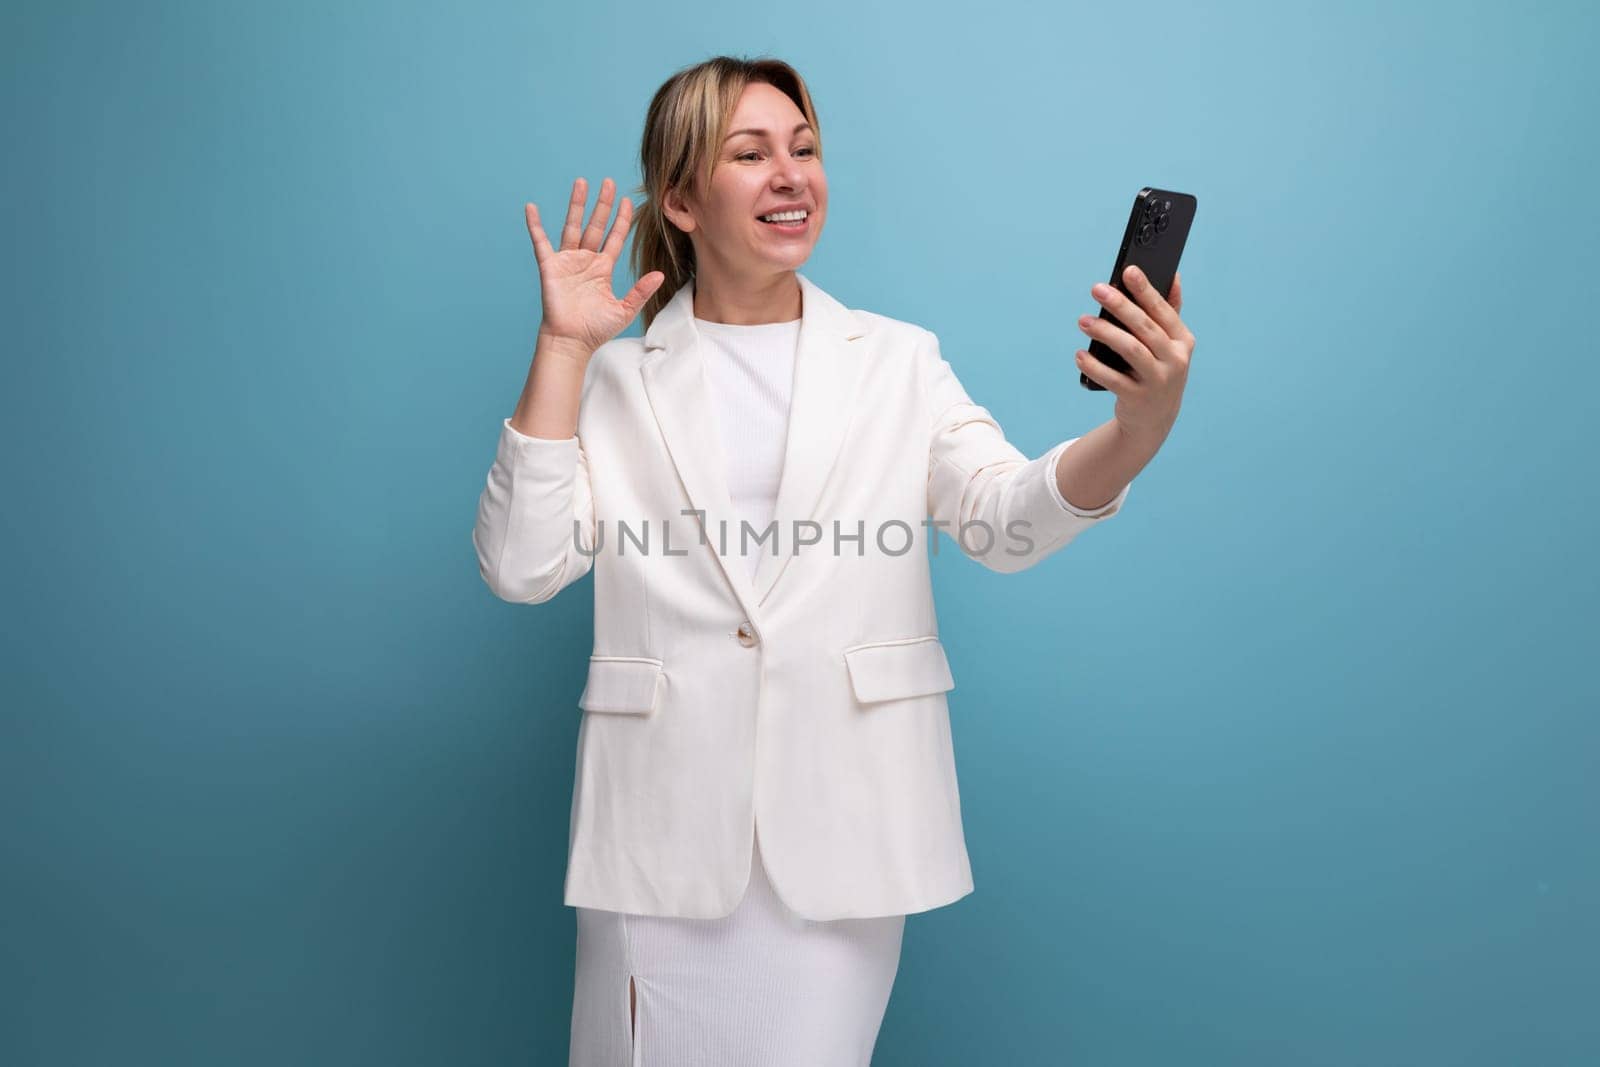 young well-groomed slender blond woman wearing a white jacket and dress uses a smartphone by TRMK